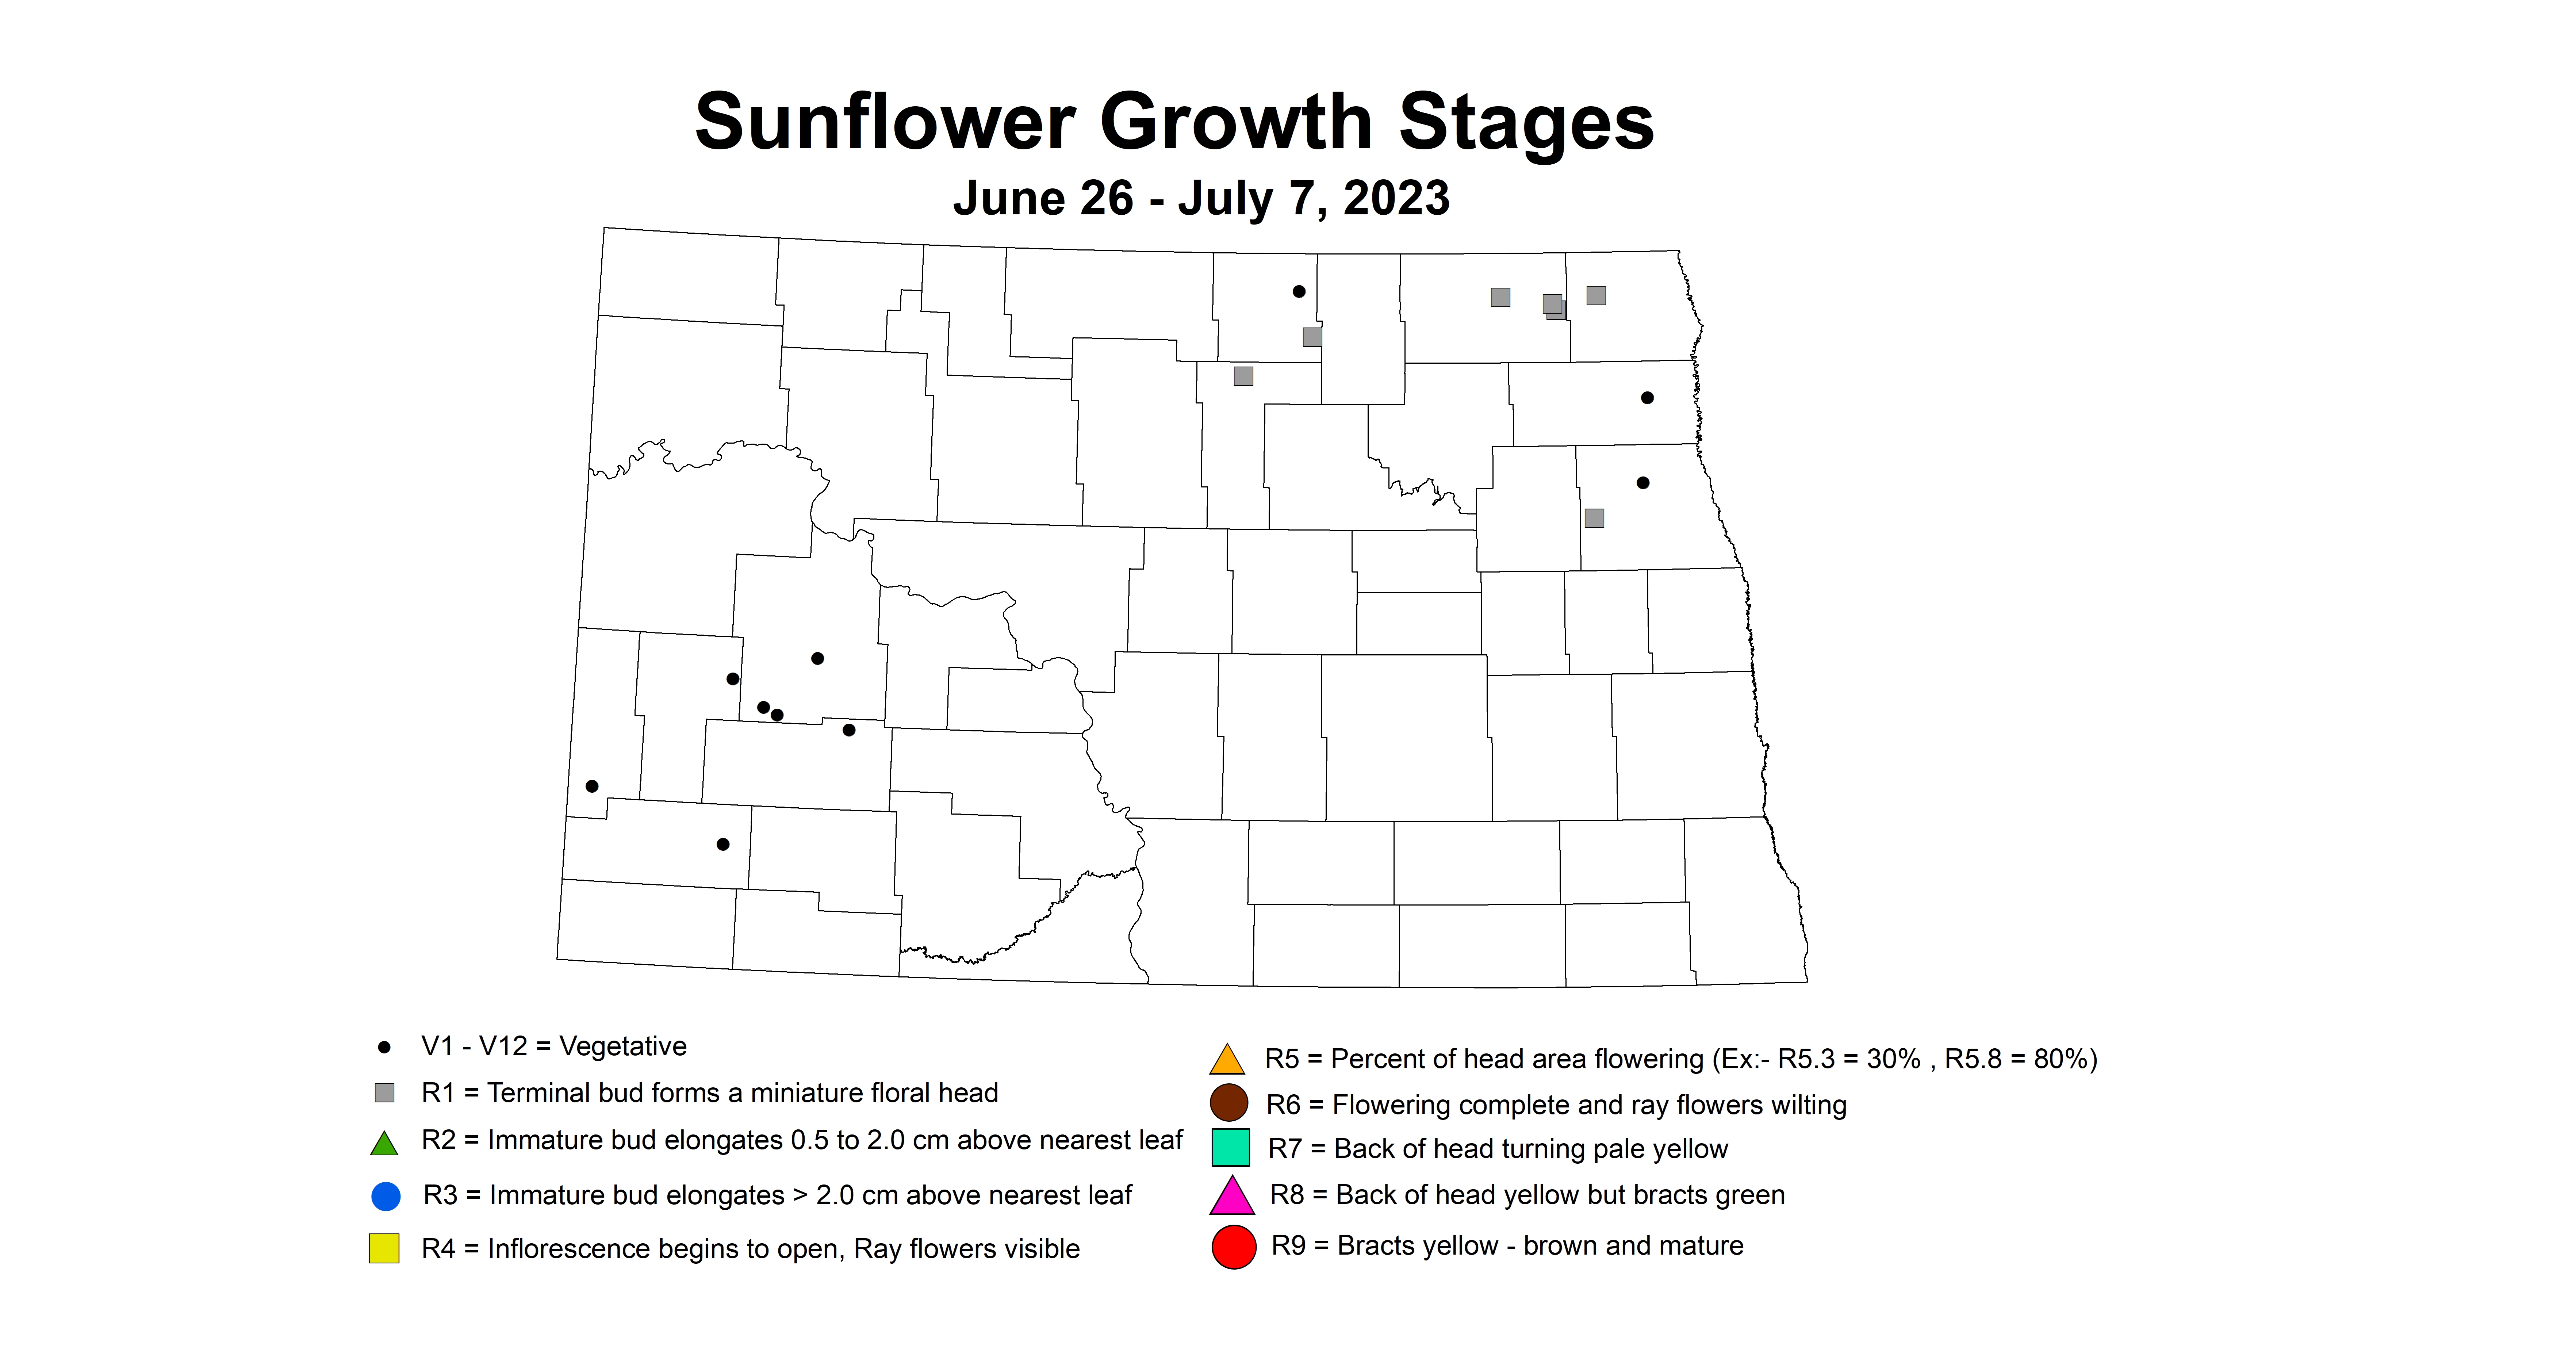 sunflower growth stages June 26 - July 7 2023